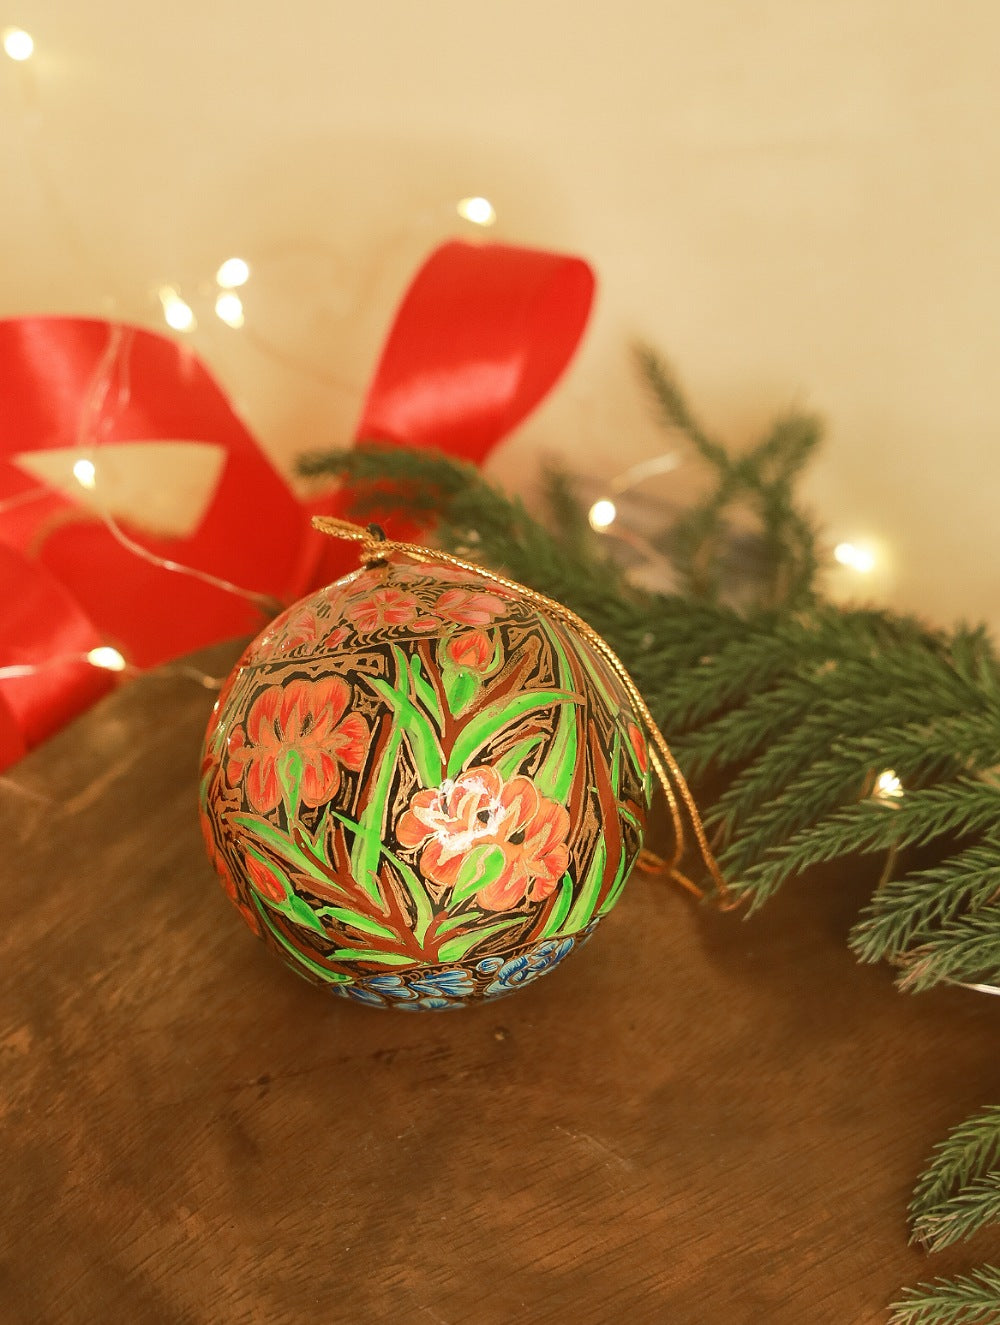 Load image into Gallery viewer, Kashmiri Art Xmas Decorations - Set of 2 Baubles